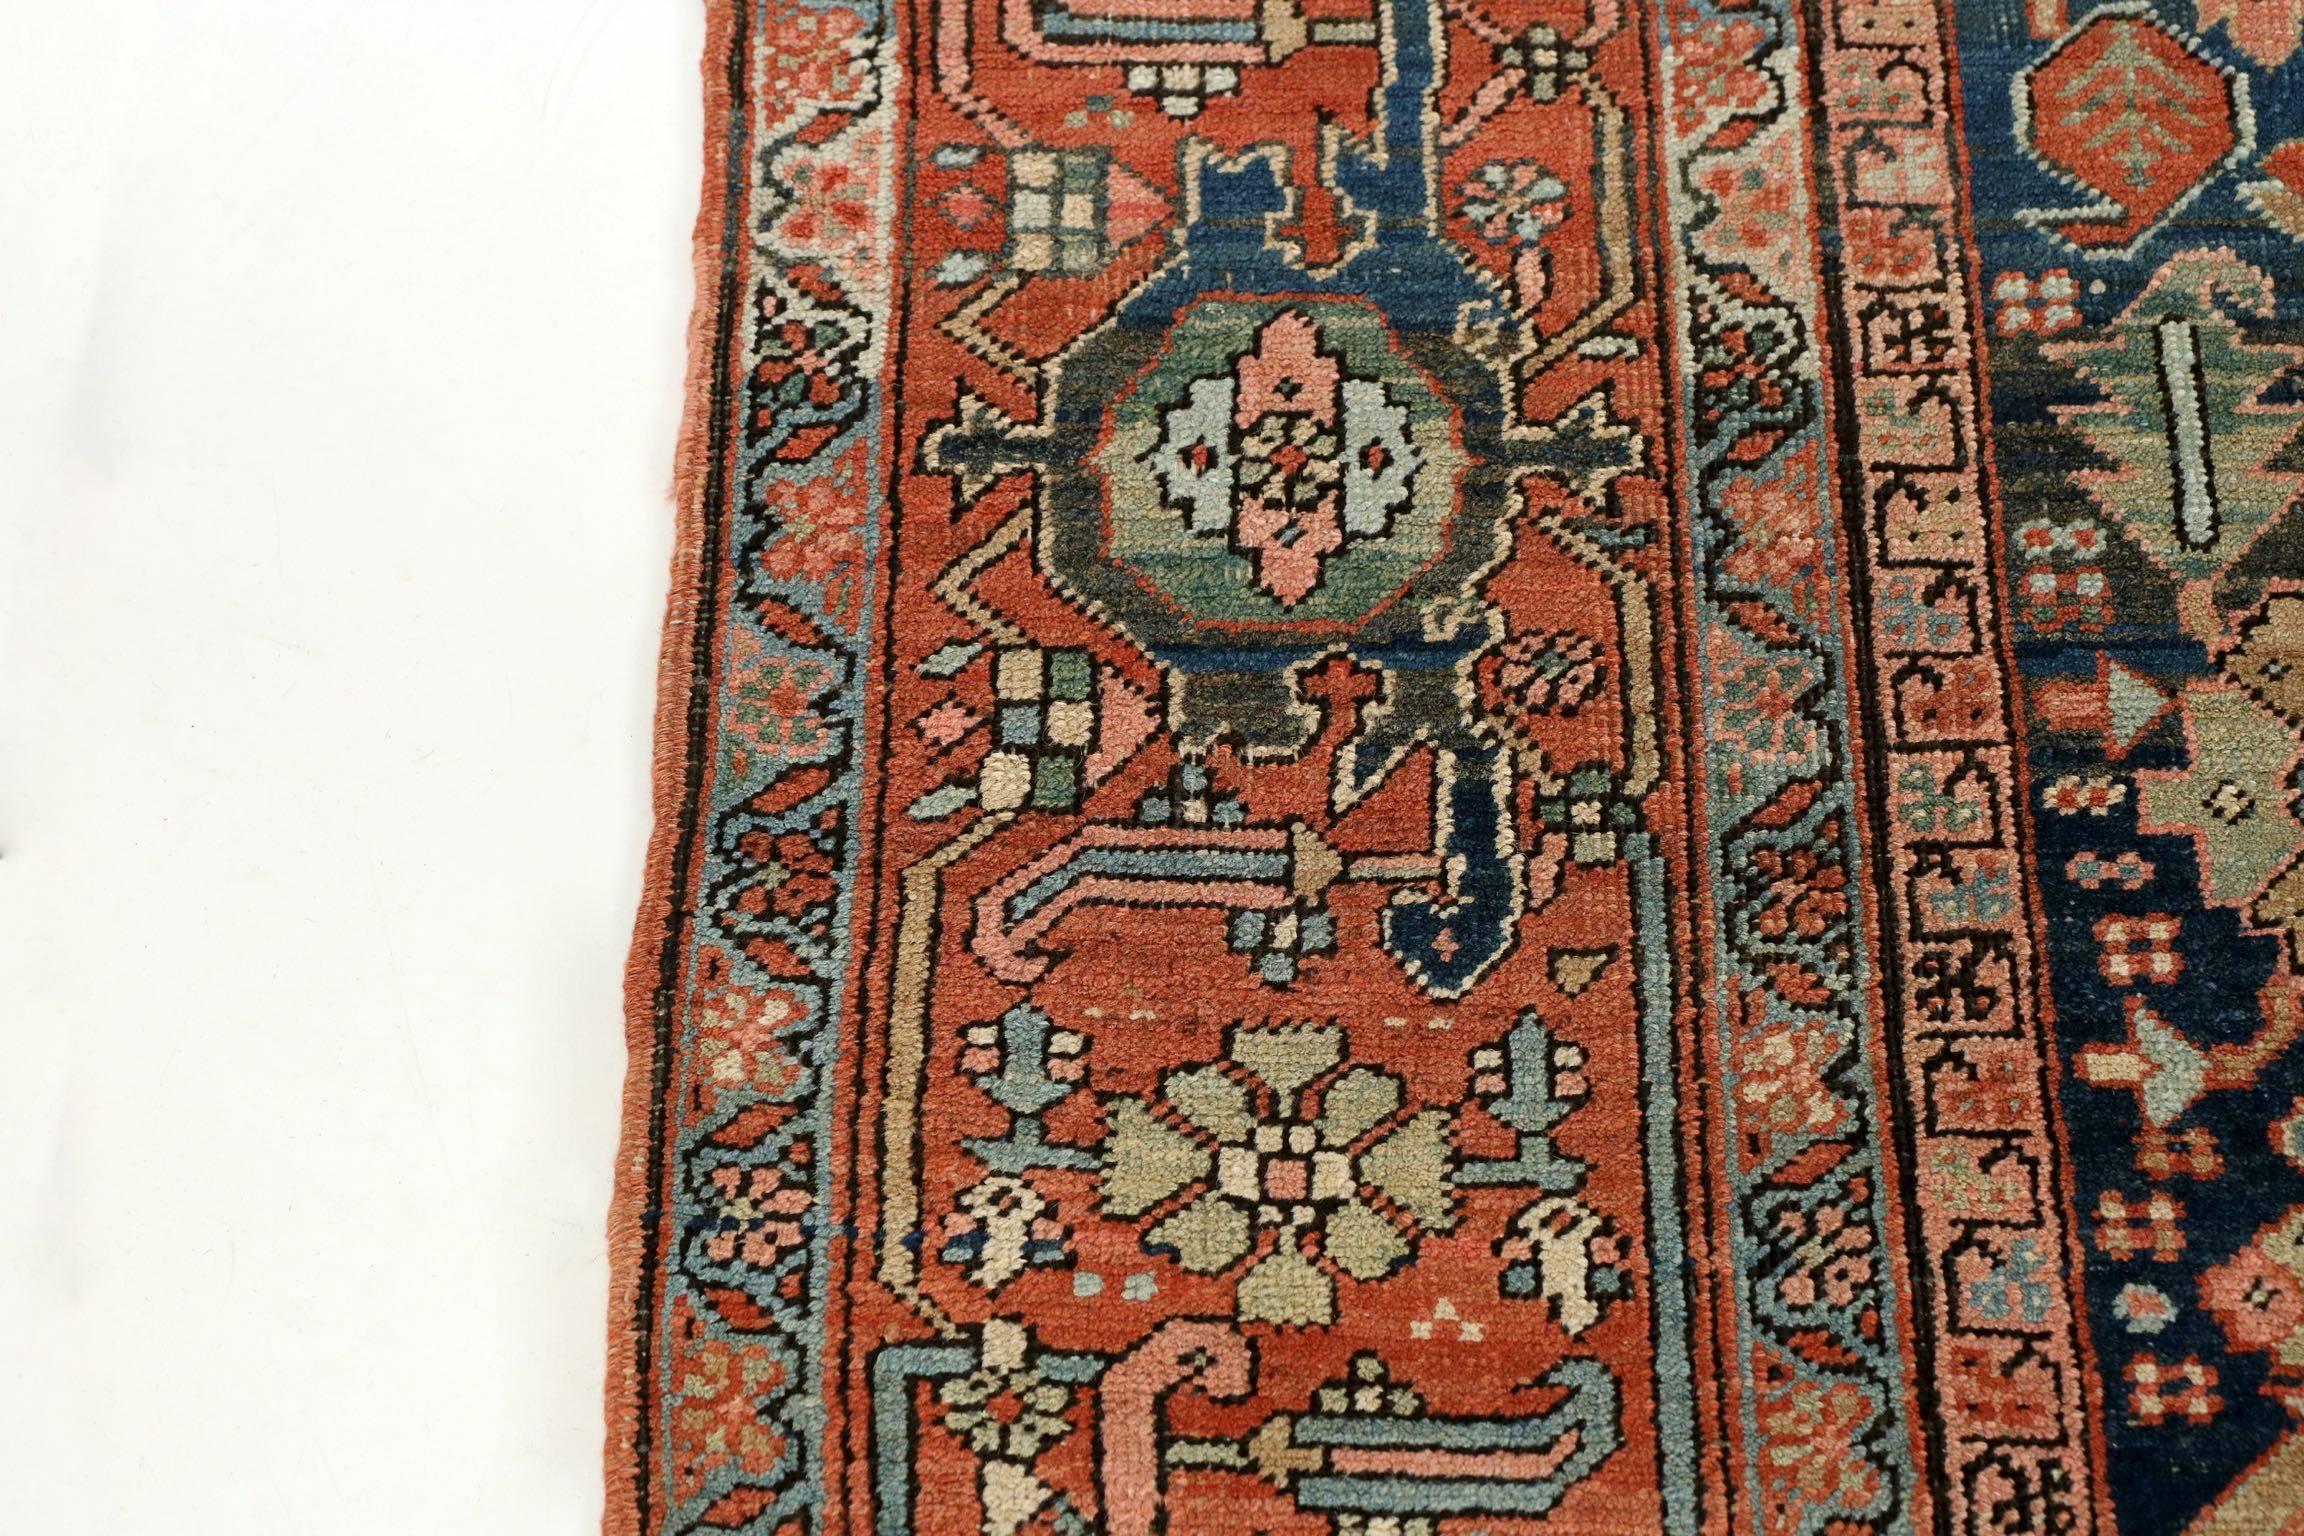 A noteworthy carpet for its fine mellowed colors and outstanding condition, this gorgeous Heriz rug is wonderfully complex with an intricate display of foliate across the navy ground of the primary. There is a vein of activity that stretches from